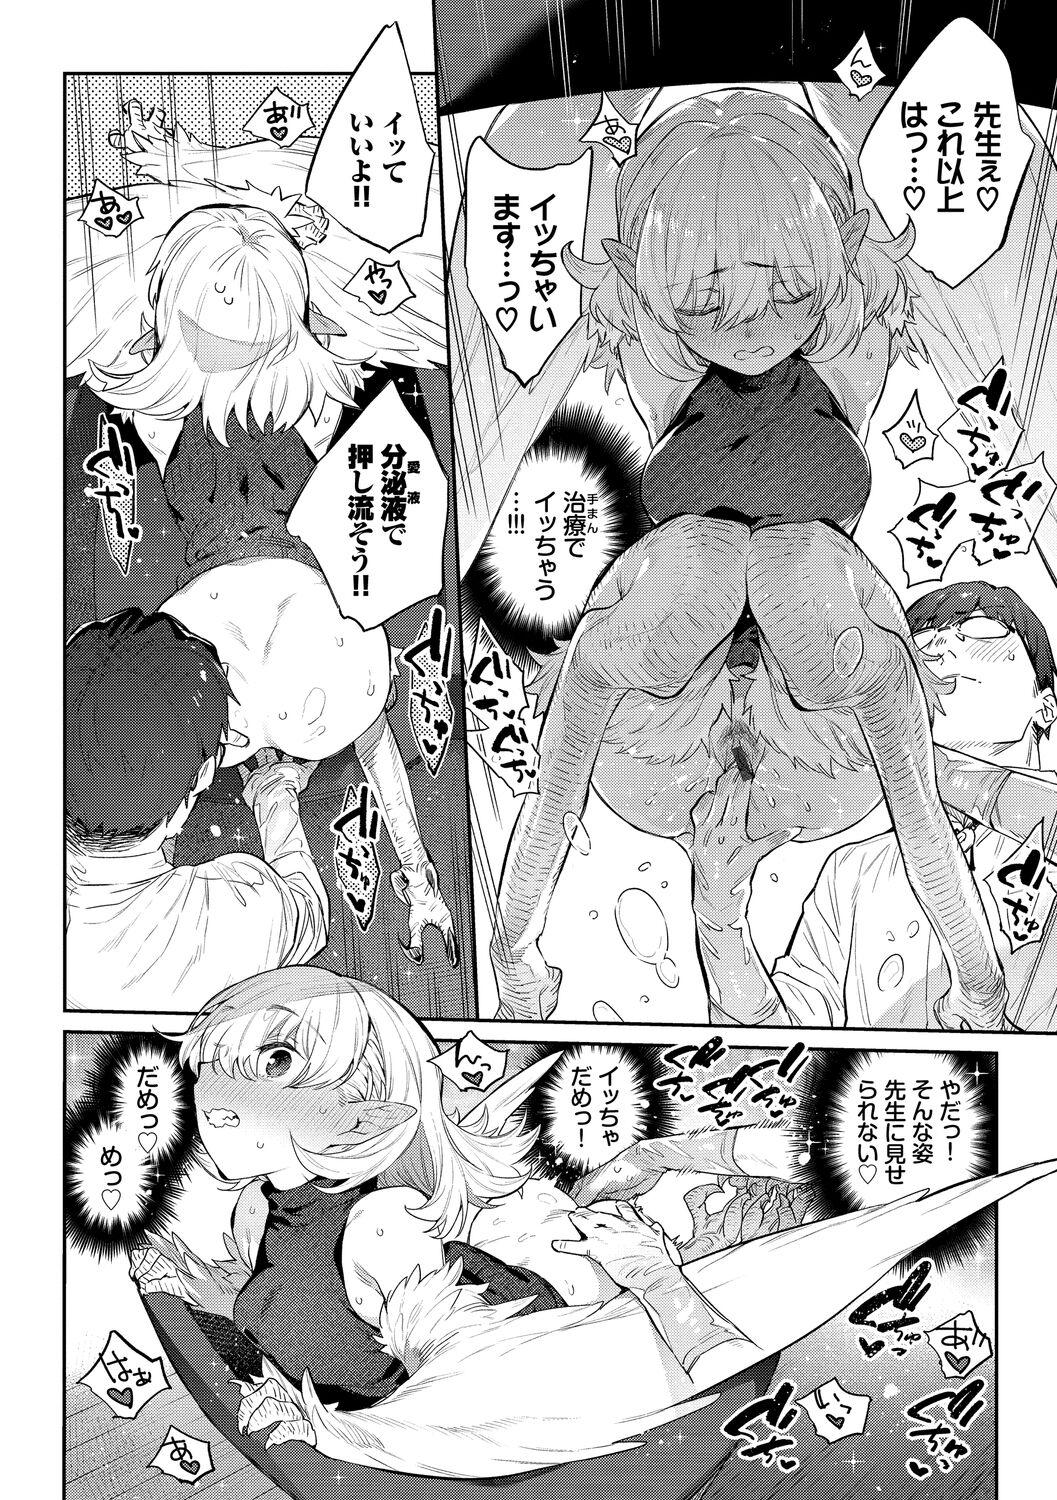 Ihou no Otome - Monster Girls in Another World 133